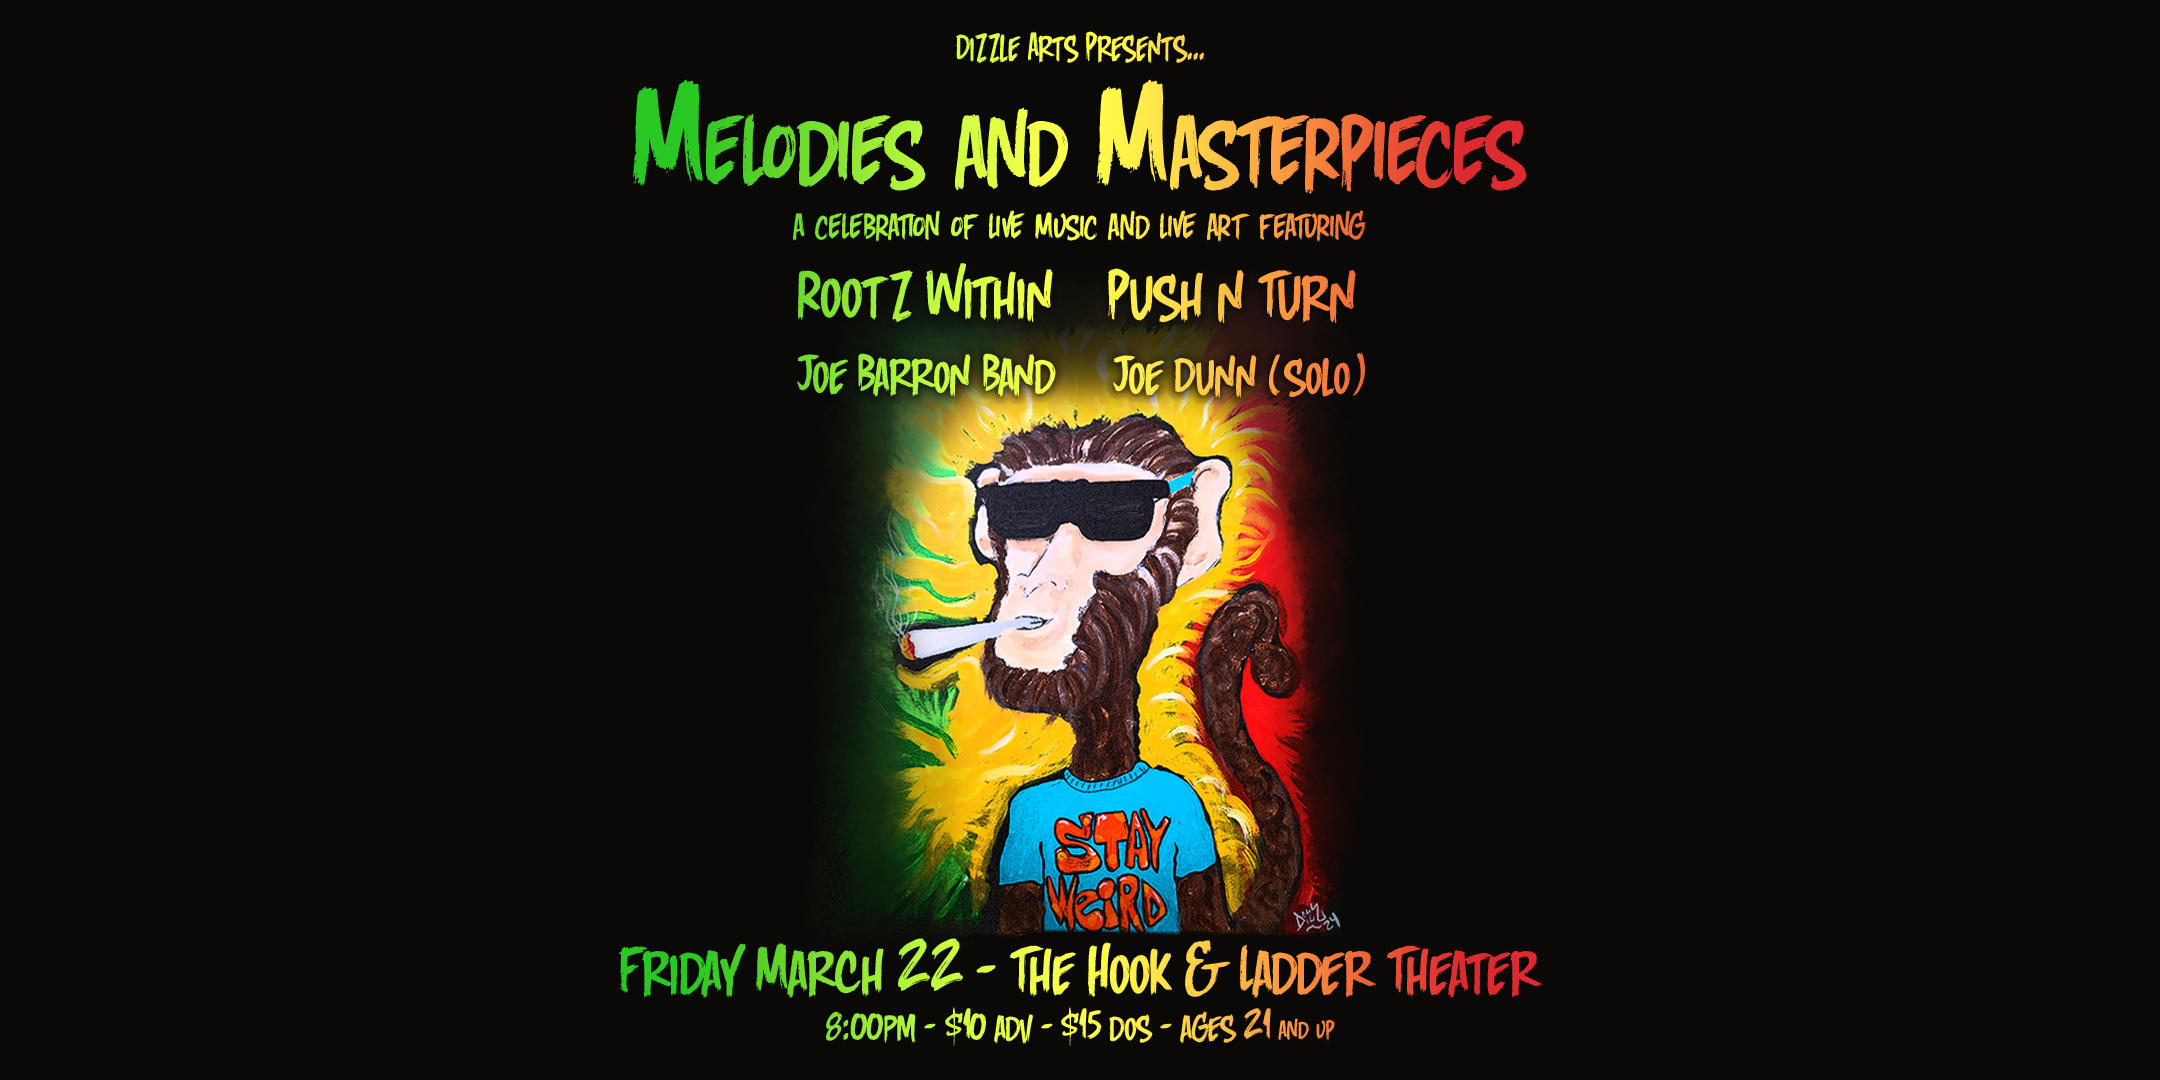 Dizzle Arts Presents 'Melodies and Masterpieces - A Celebration of Live Music and Live Art' Featuring Rootz Within Push & Turn Joe Barron Band Joe Dunn (solo) Friday March 22 The Hook and Ladder Theater Doors 8:00pm :: Music 8:30pm :: 21+ General Admission: $10 ADV / $15 DOS